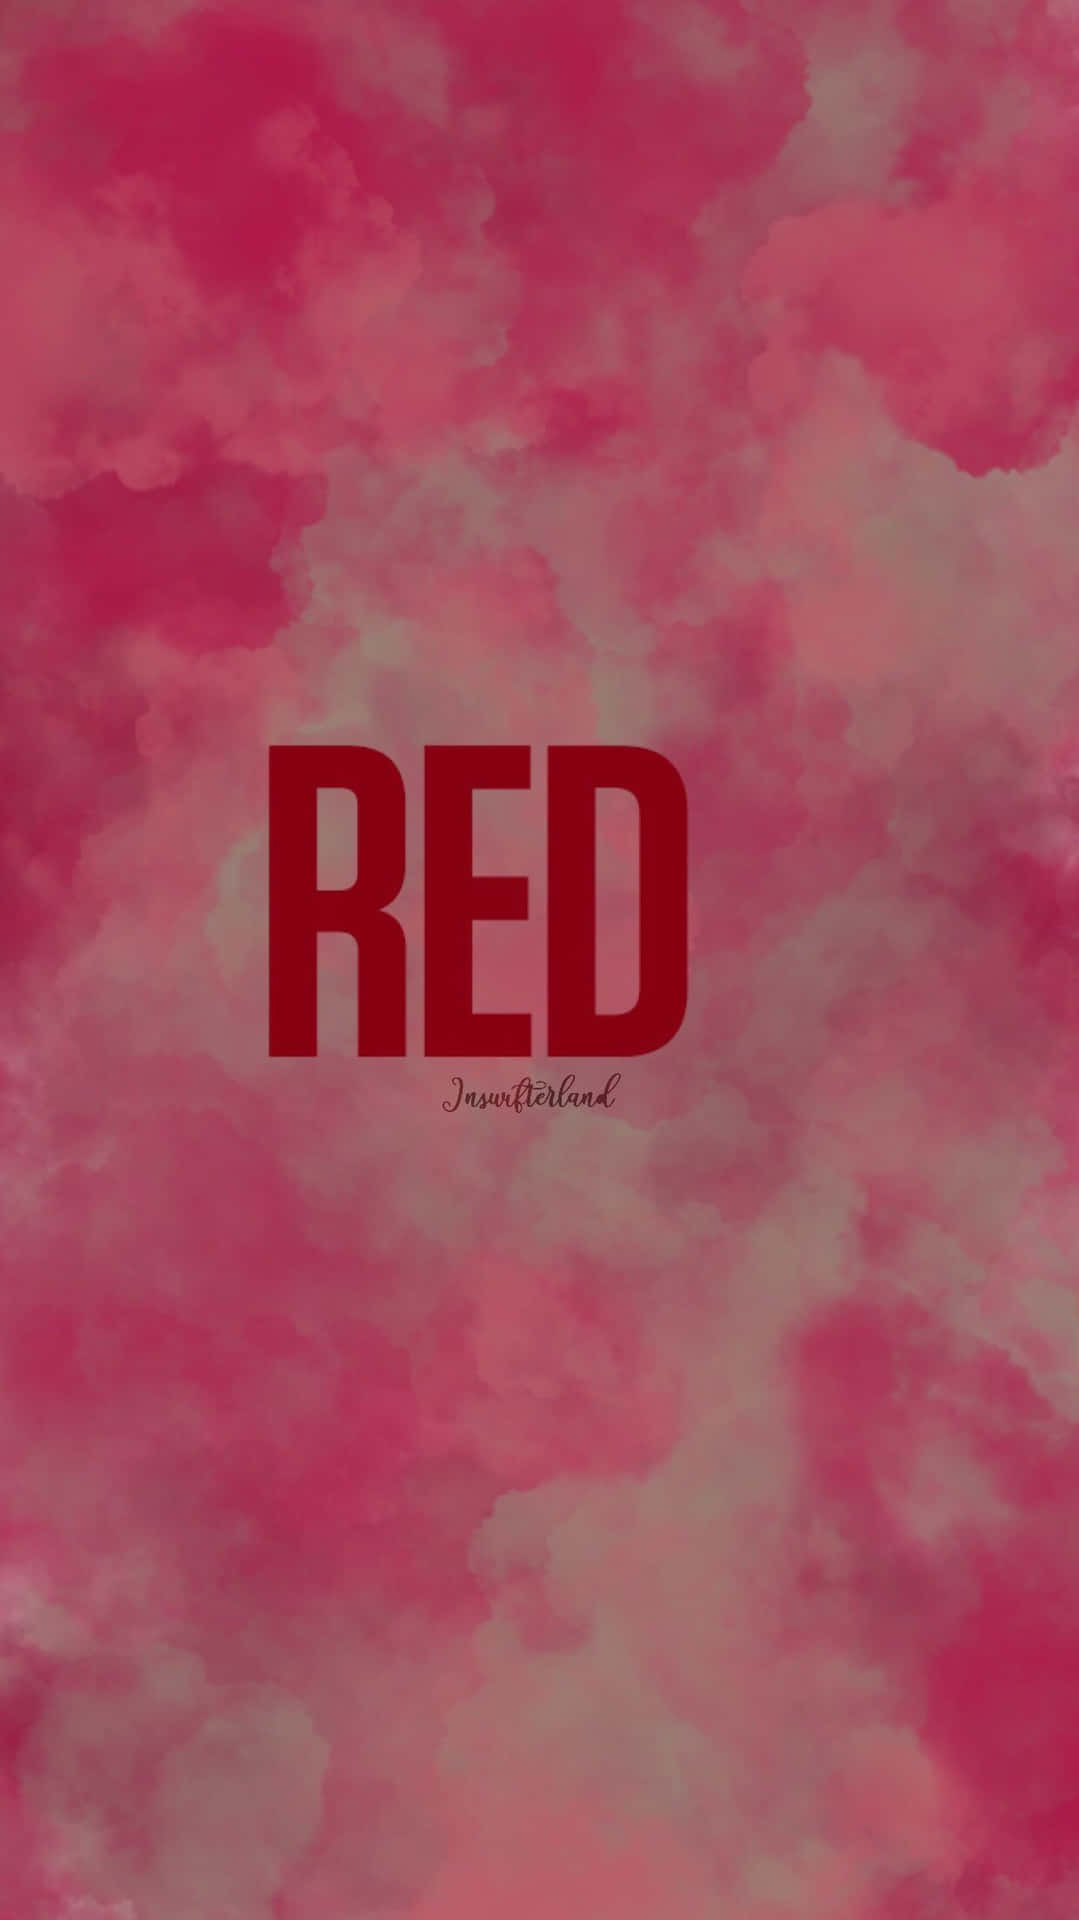 Nydtaylor Swifts Nye Album Red Taylor's Version. Wallpaper